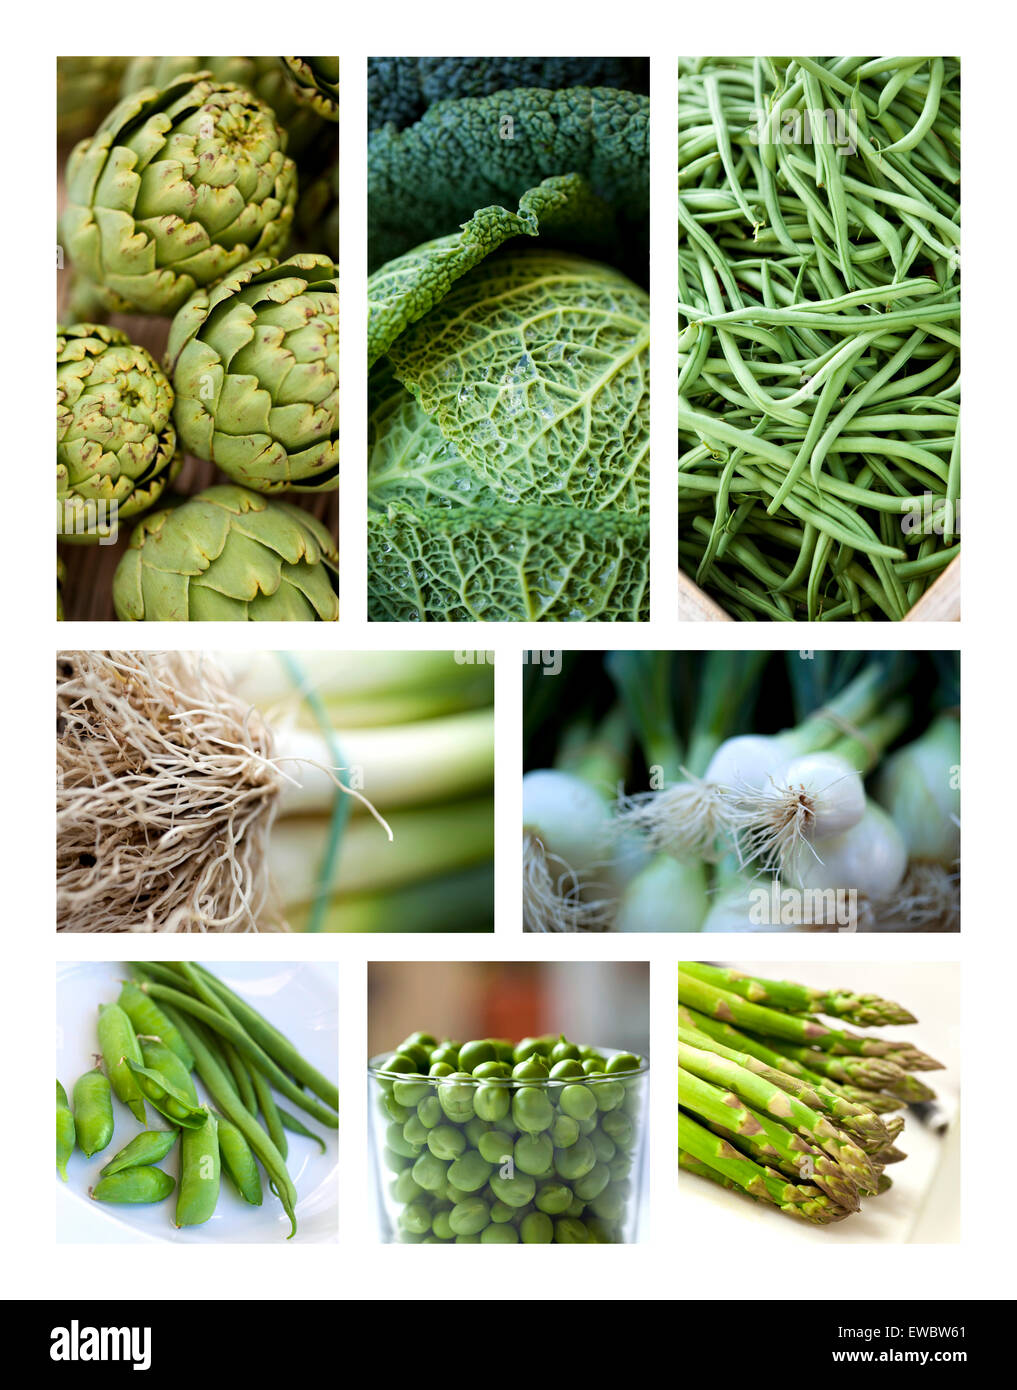 Collage of various green vegetables on a market stall Stock Photo